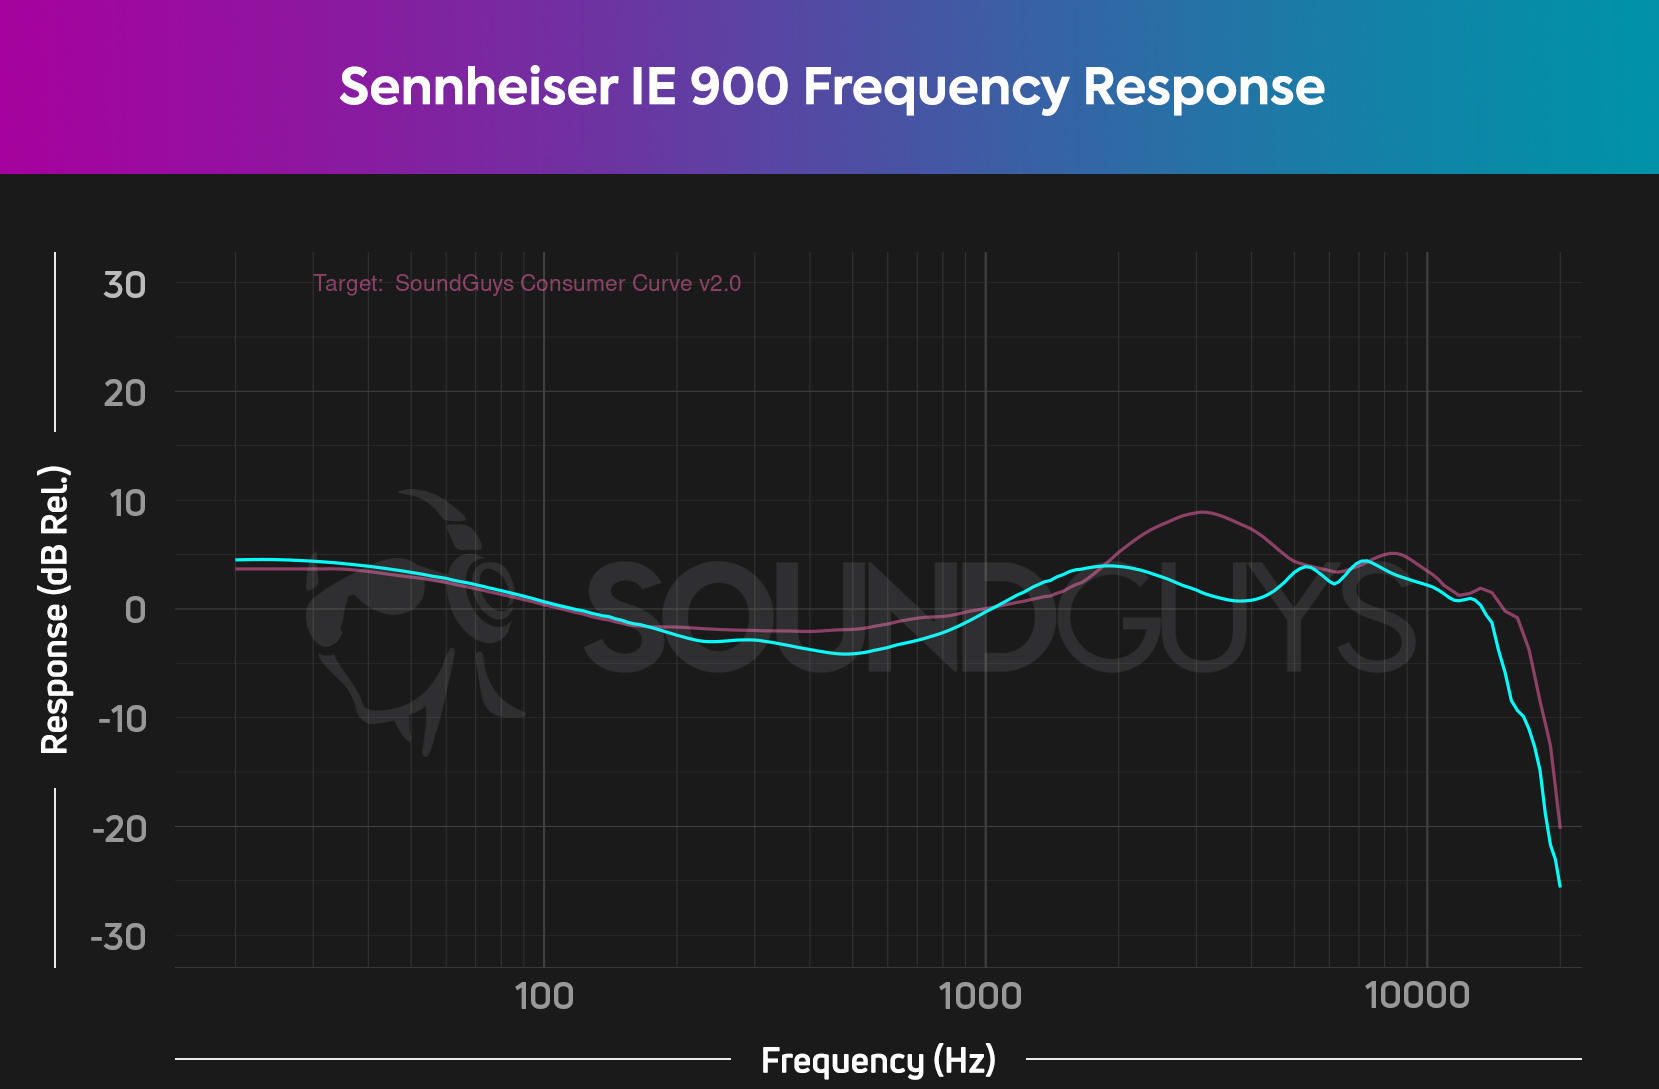 Frequency response of Sennheiser IE 900 set against the ideal consumer curve.